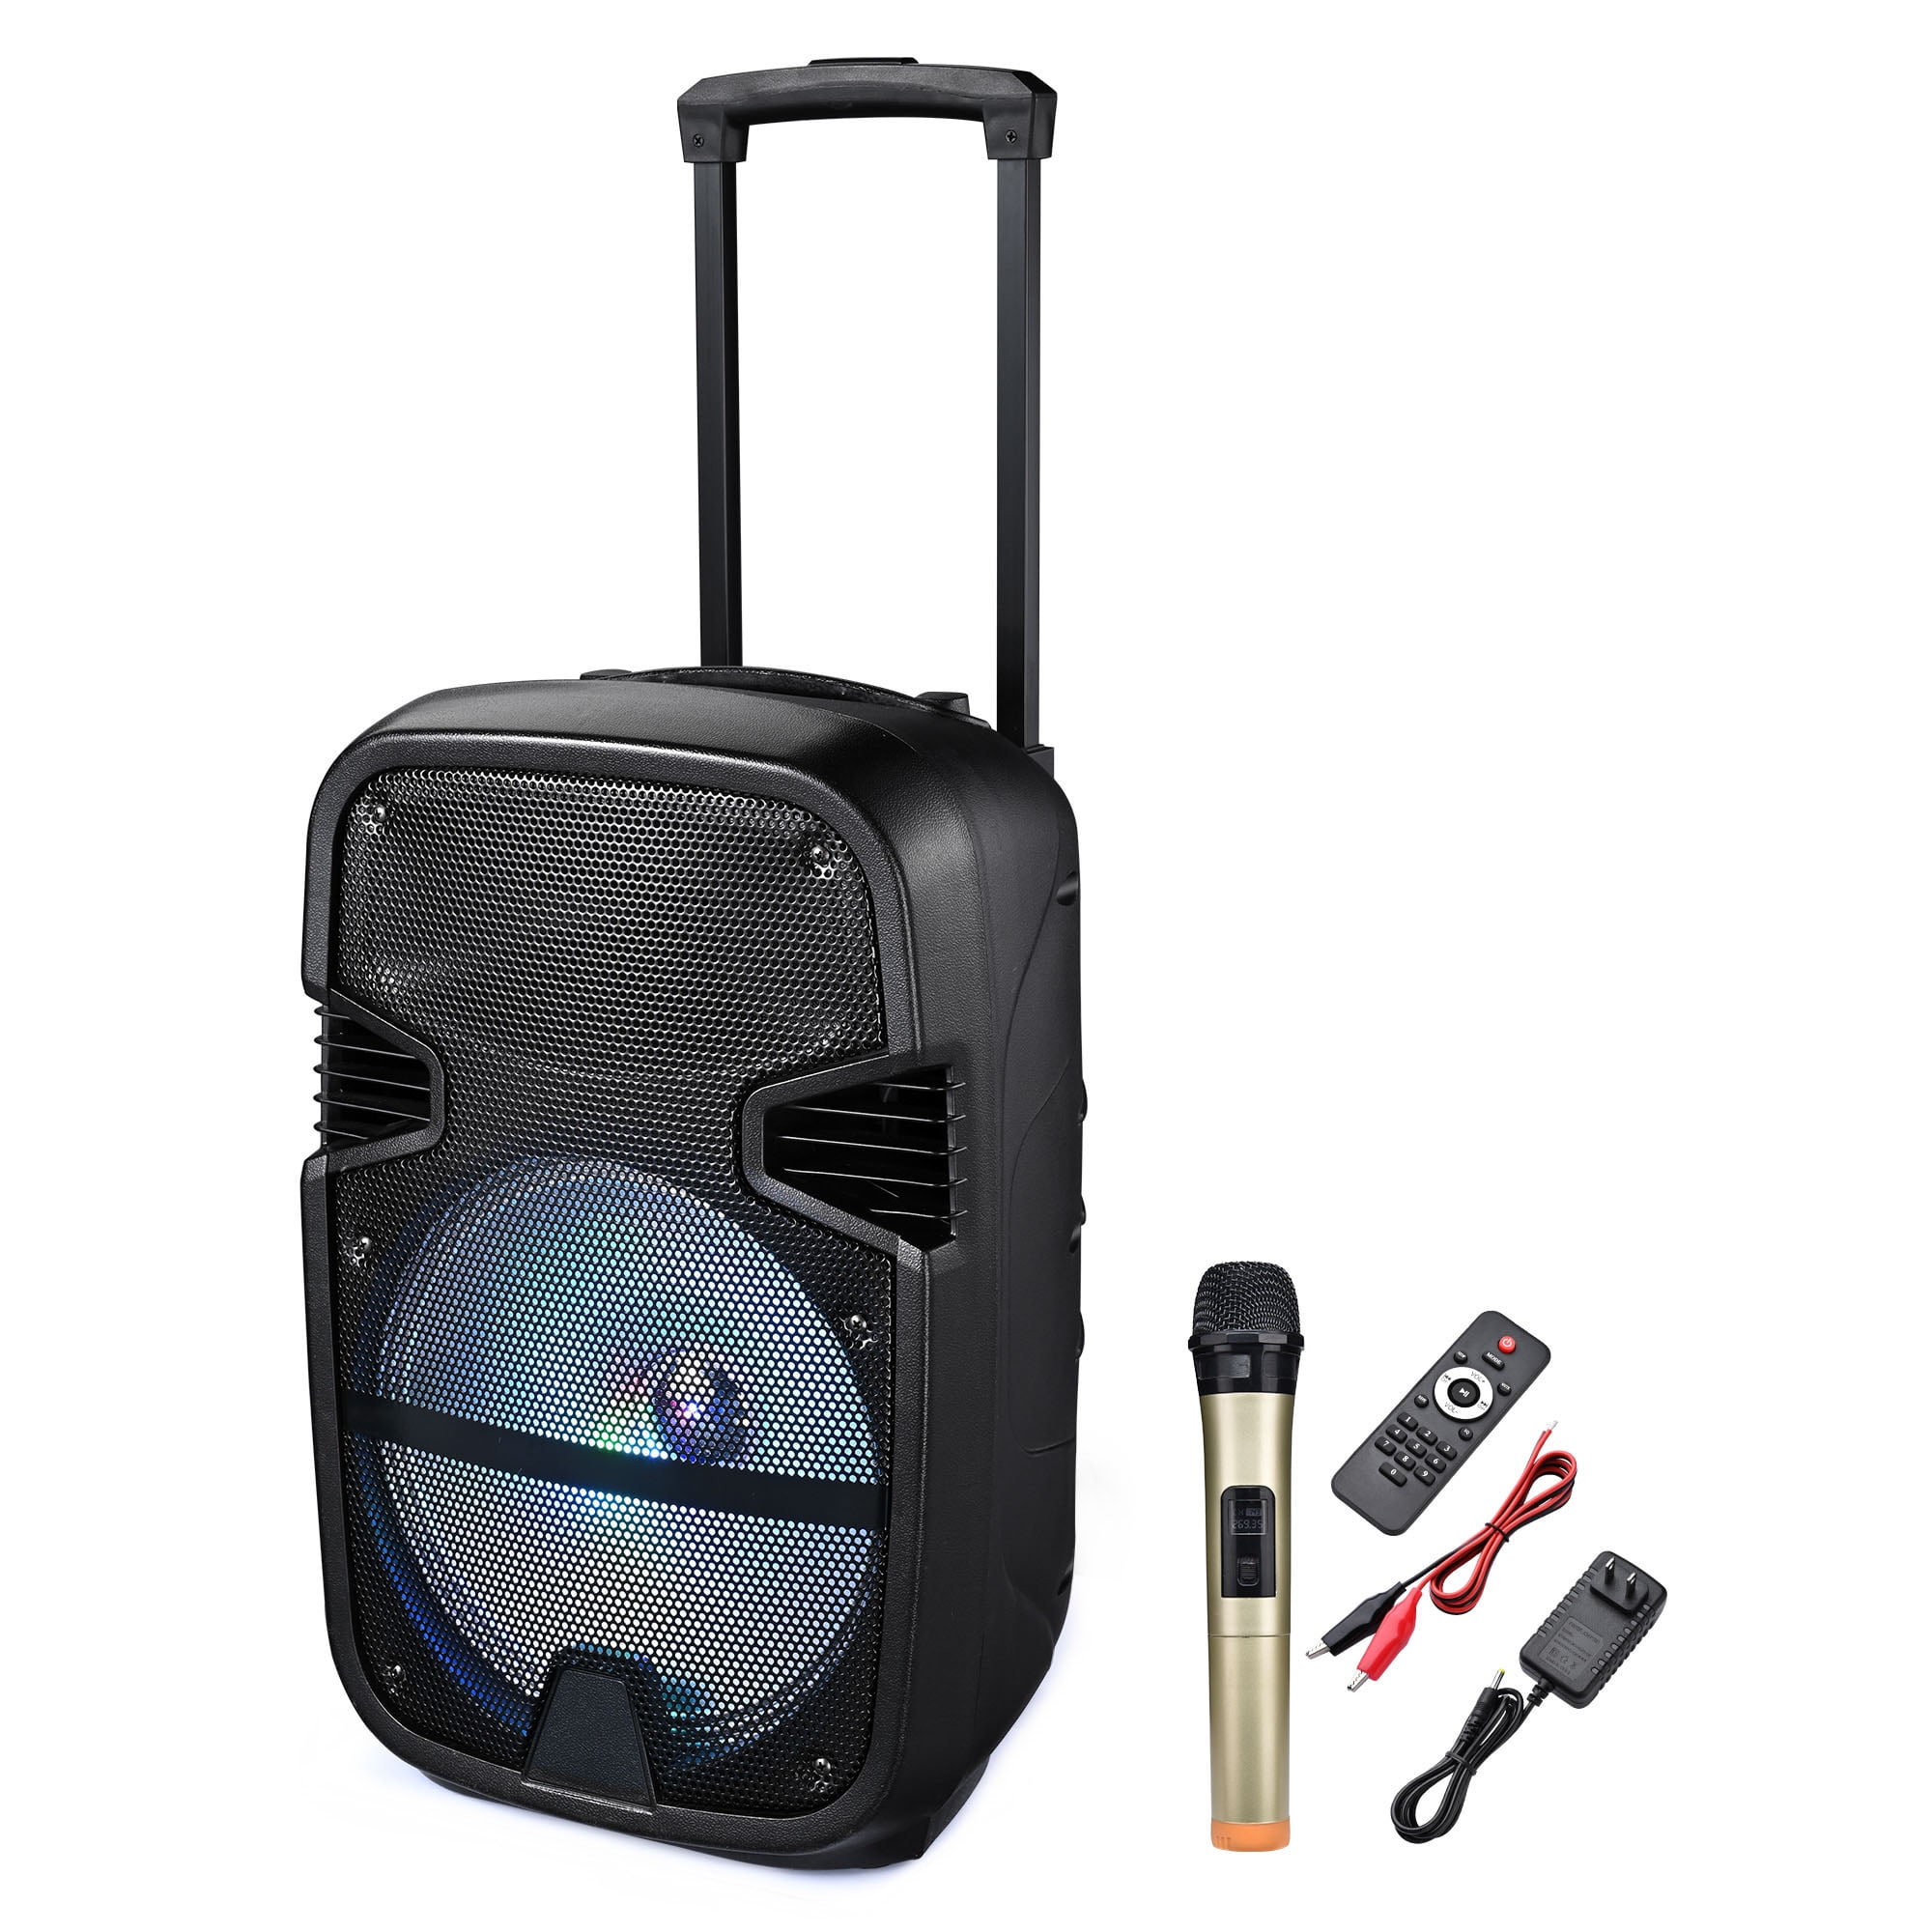 Karaoke Party Amplifier Sound System with AUX/FM Radio/SD/USB STARQUEEN Portable Bluetooth Speaker 15Inch Woofer Outdoor Rechargeable PA System with Wireless Micorphone/Remote/Wheels/DJ Light/Stand 